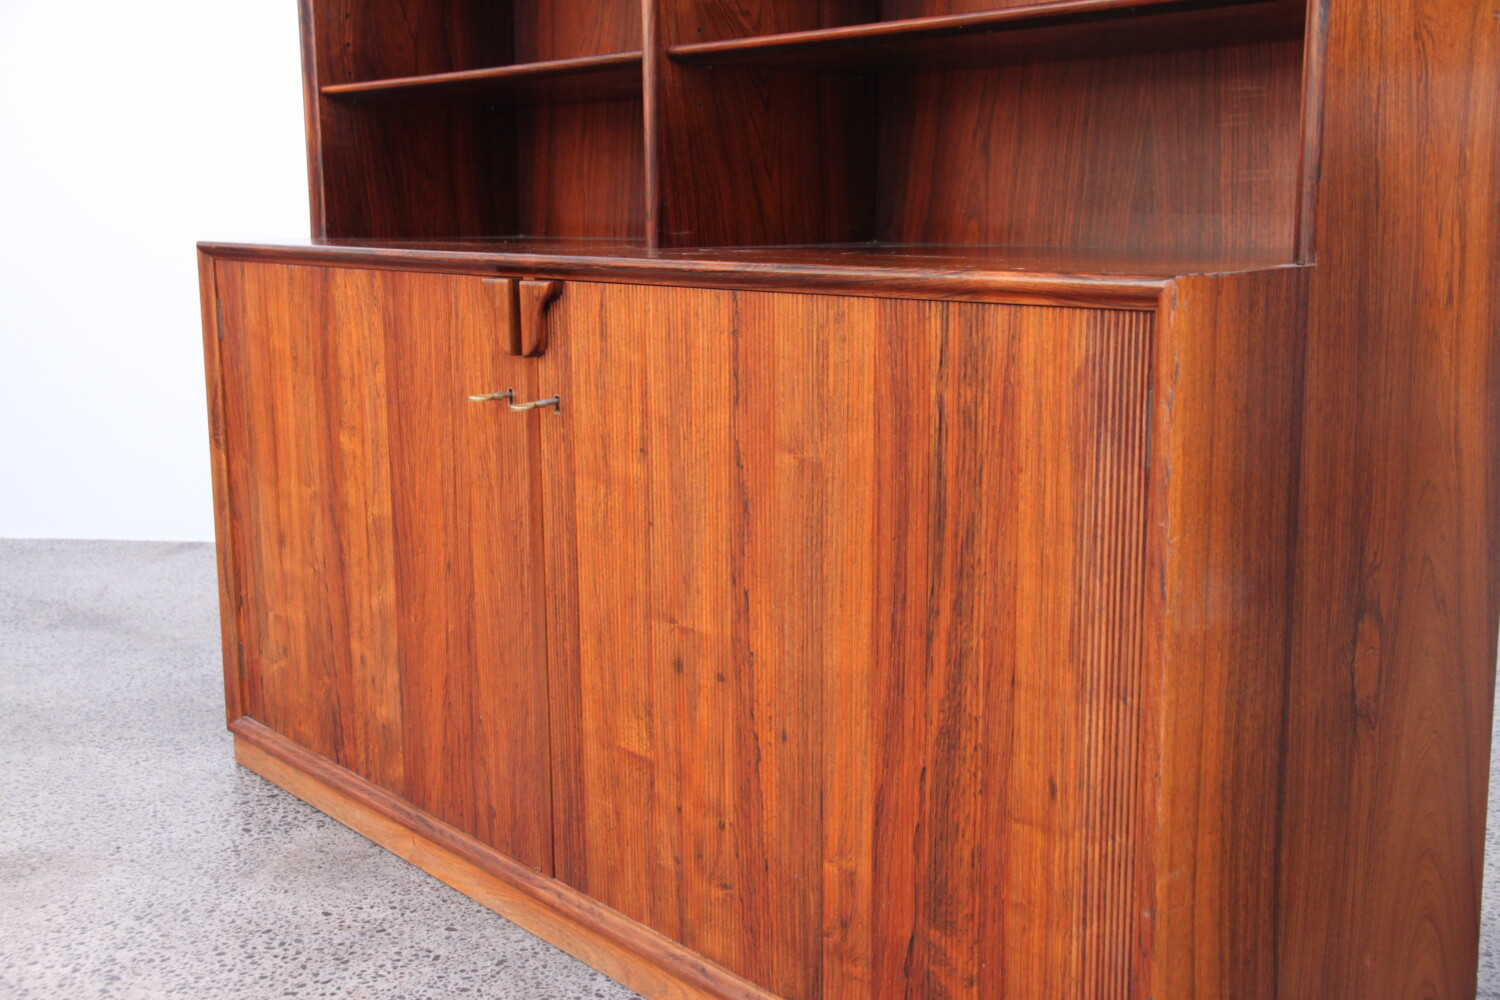 Rosewood Bookcase by Frode Holm